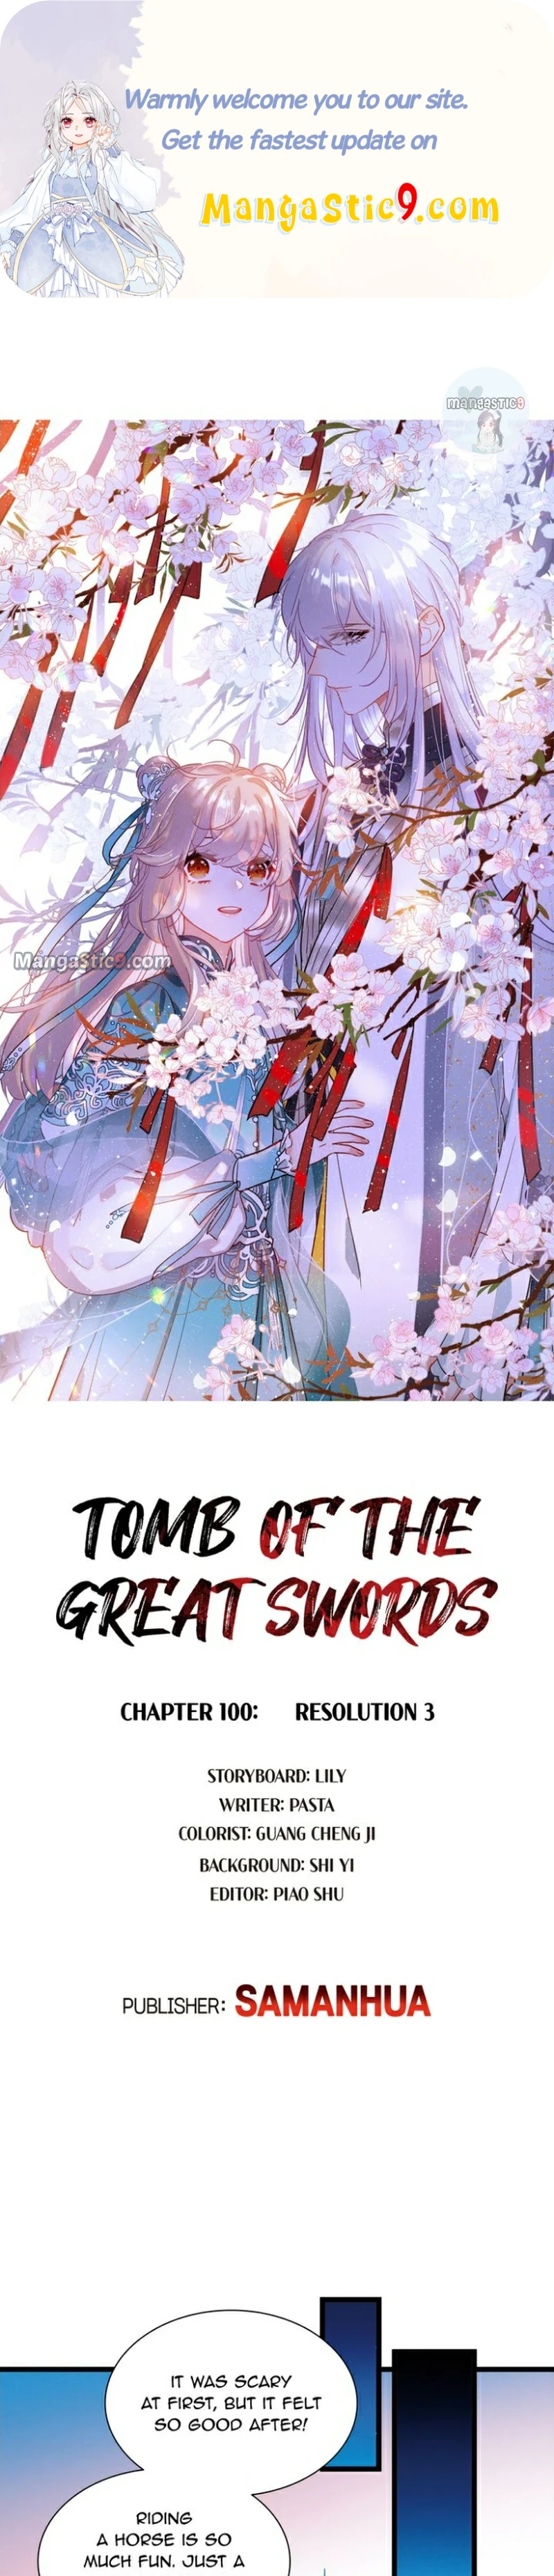 Tomb of the Great Swords Chapter 100